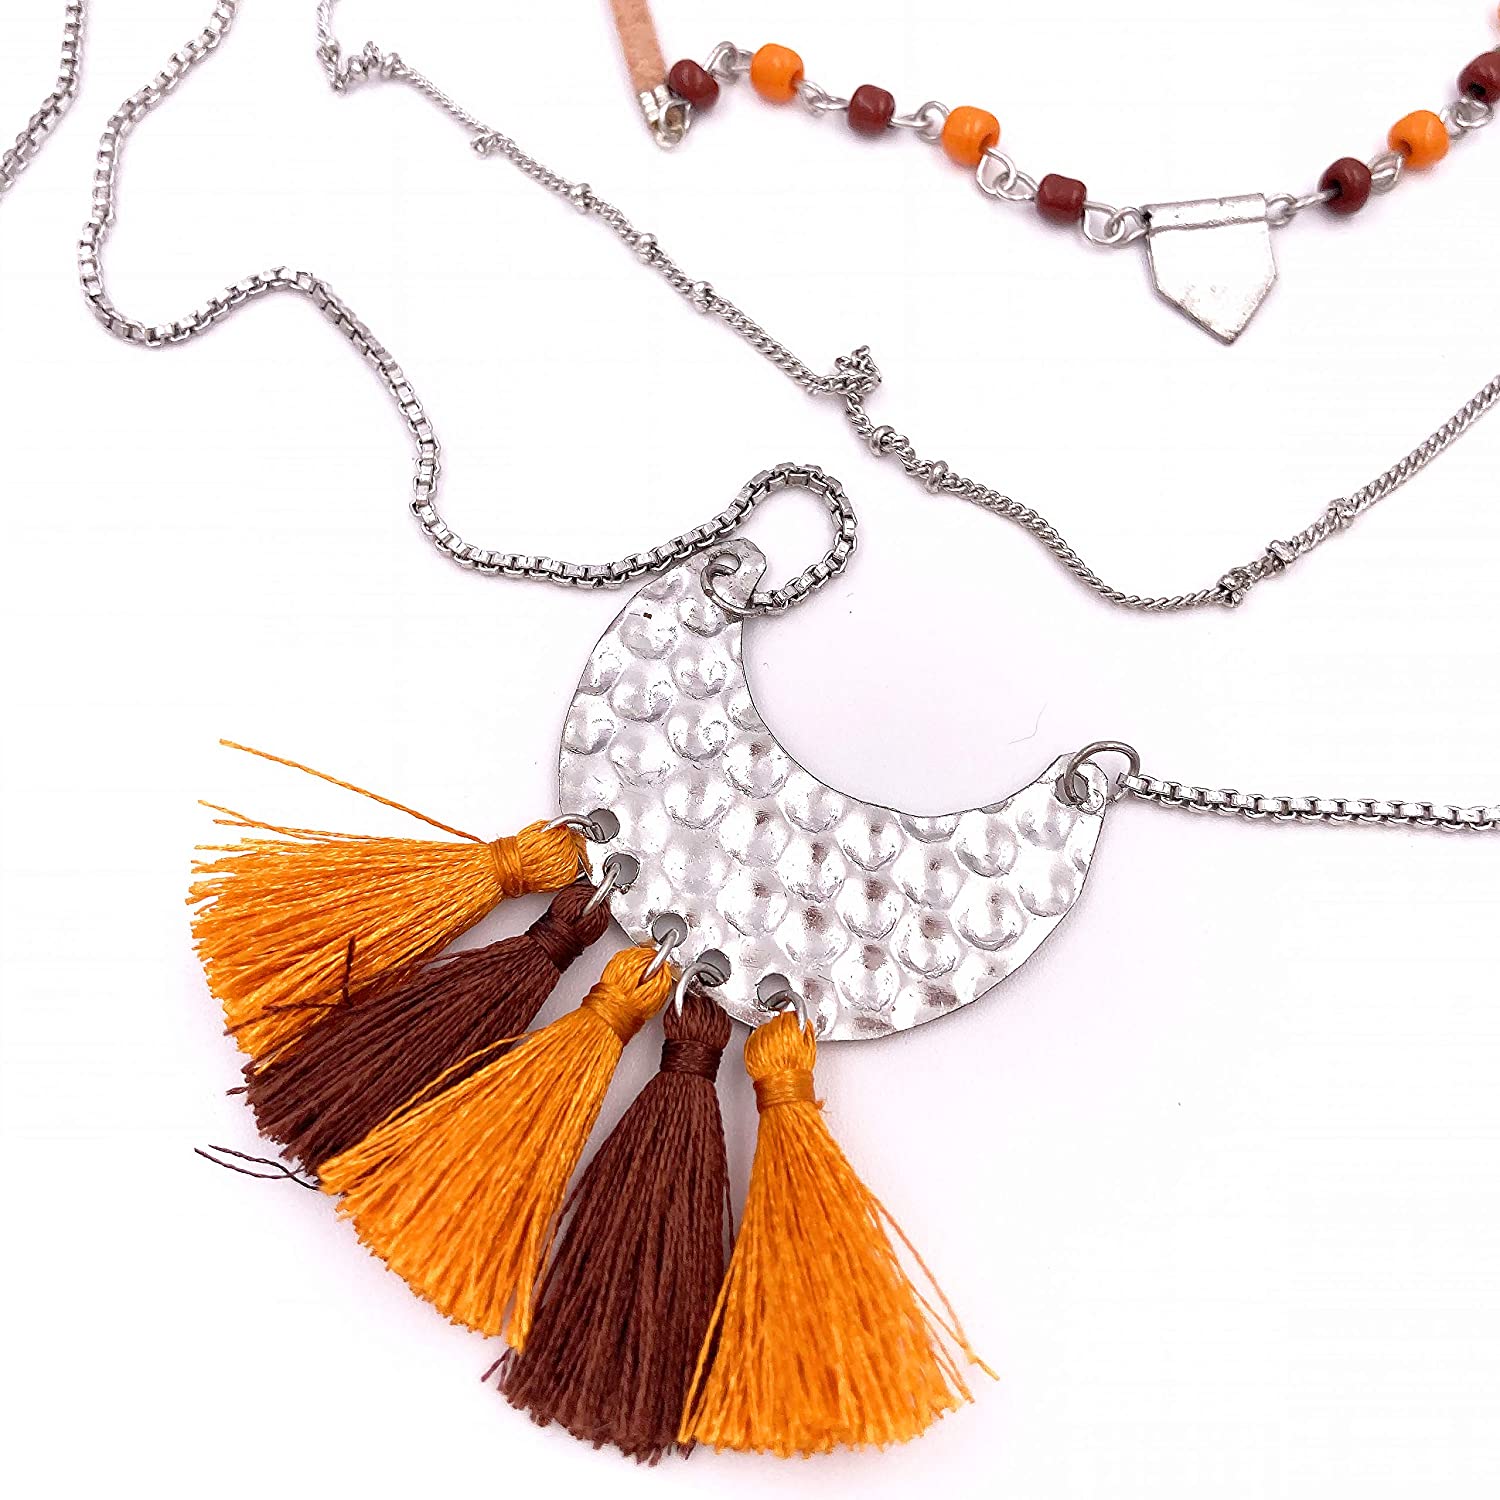 3 Layer Long Tassel Necklace With Orange Beads Wishes N Kisses